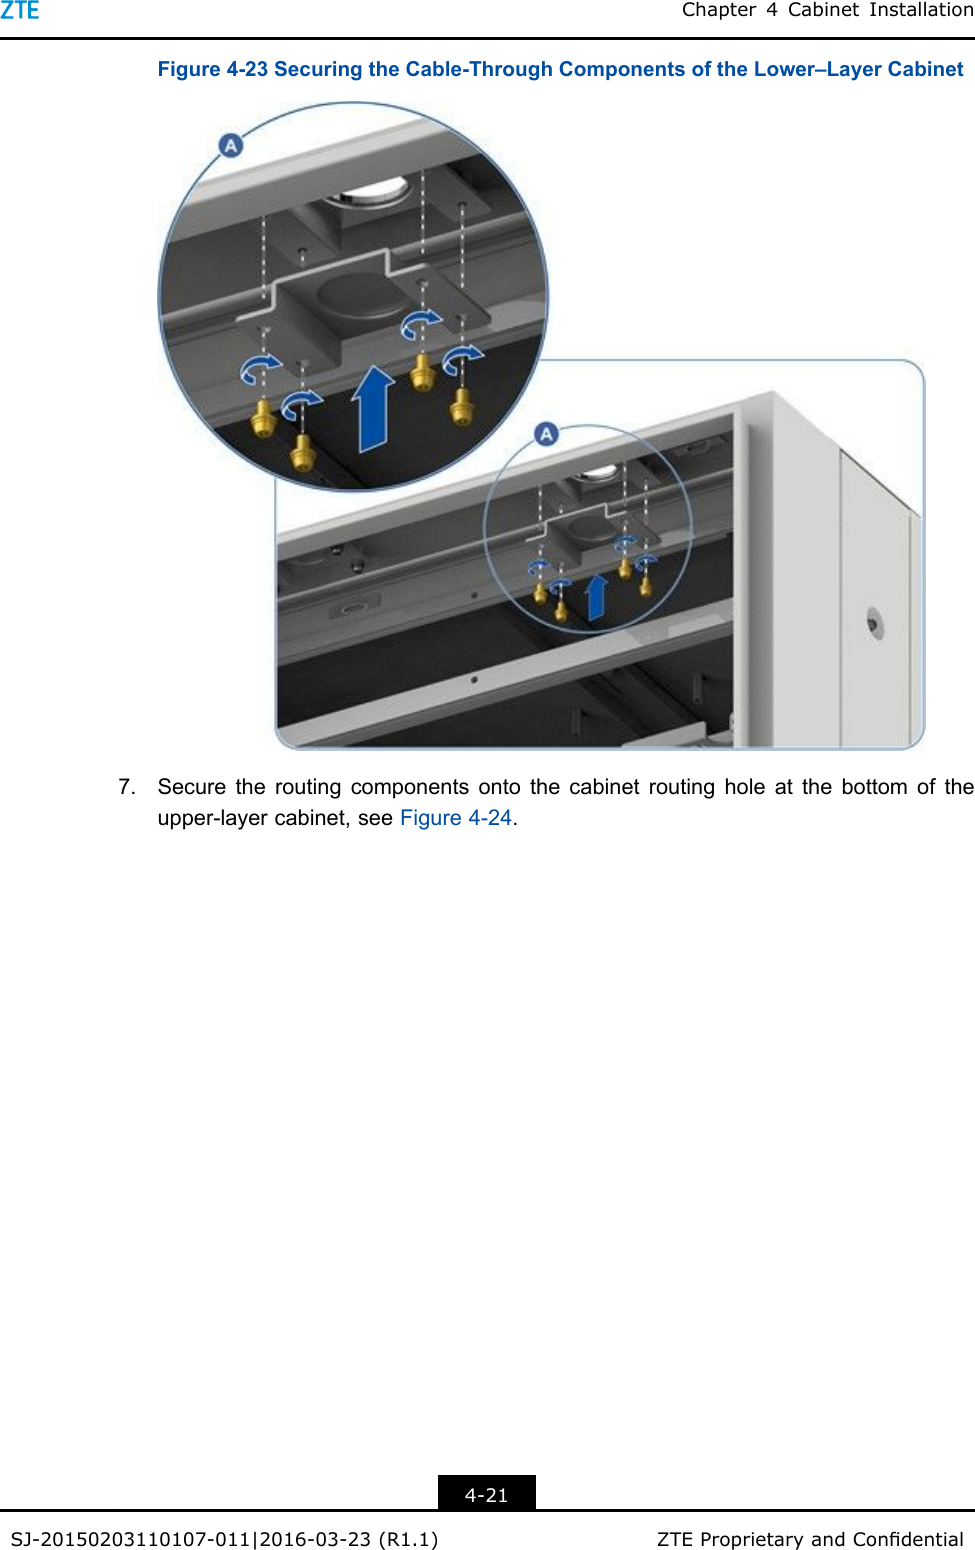 Chapter4CabinetInstallationFigure4-23SecuringtheCable-ThroughComponentsoftheLower–LayerCabinet7.Securetheroutingcomponentsontothecabinetroutingholeatthebottomoftheupper-layercabinet,seeFigure4-24.4-21SJ-20150203110107-011|2016-03-23(R1.1)ZTEProprietaryandCondential